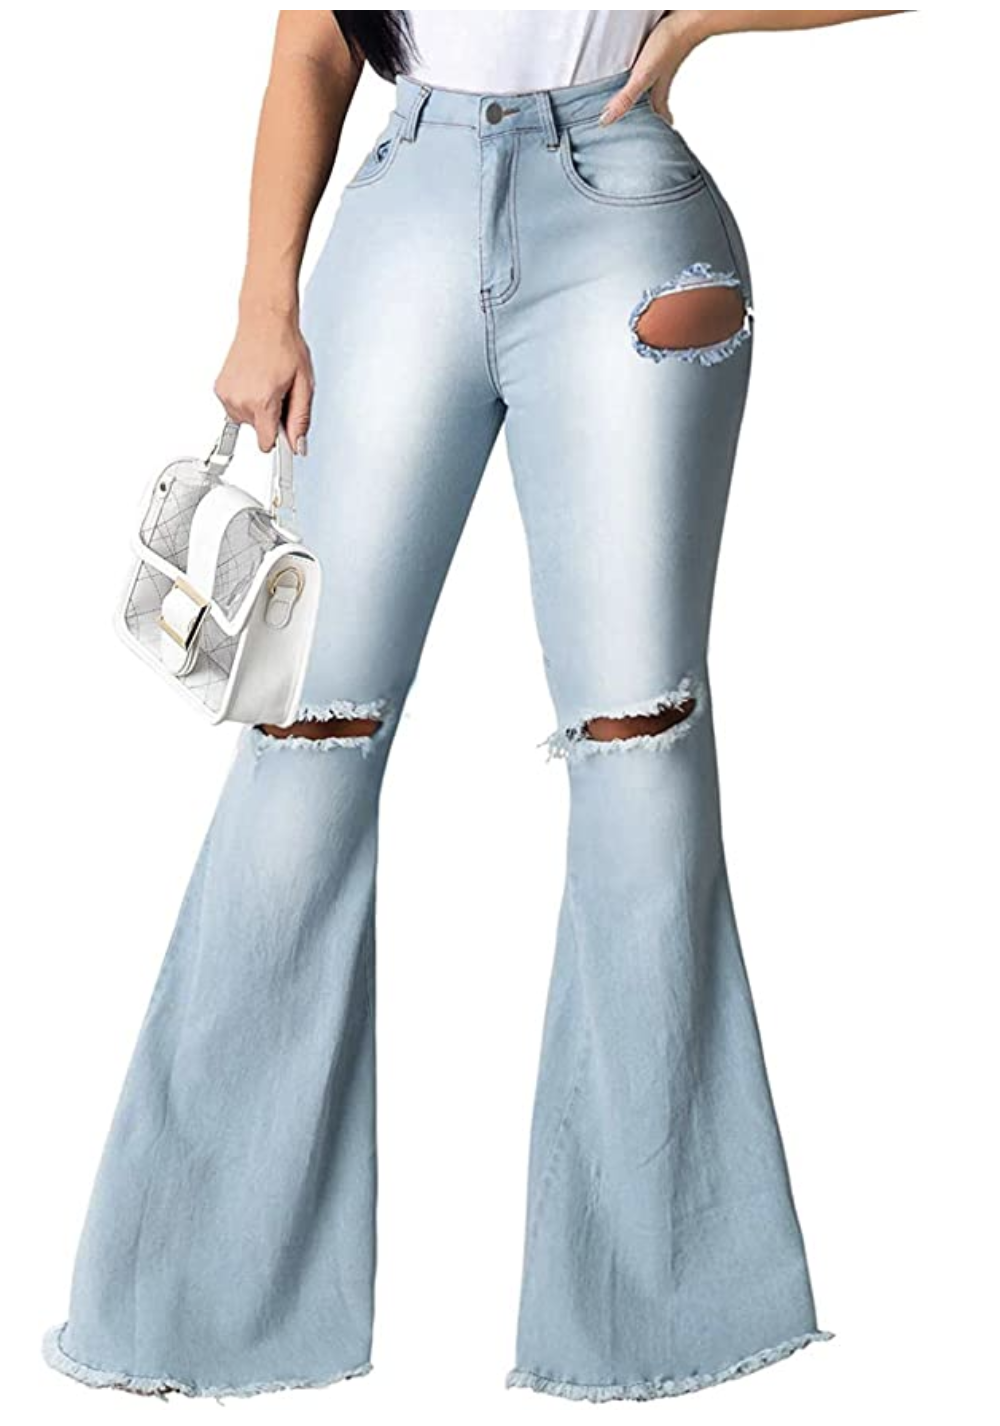 Hailey Baldwin’s Ripped Jeans: Where To Buy A Similar Distressed Pair ...